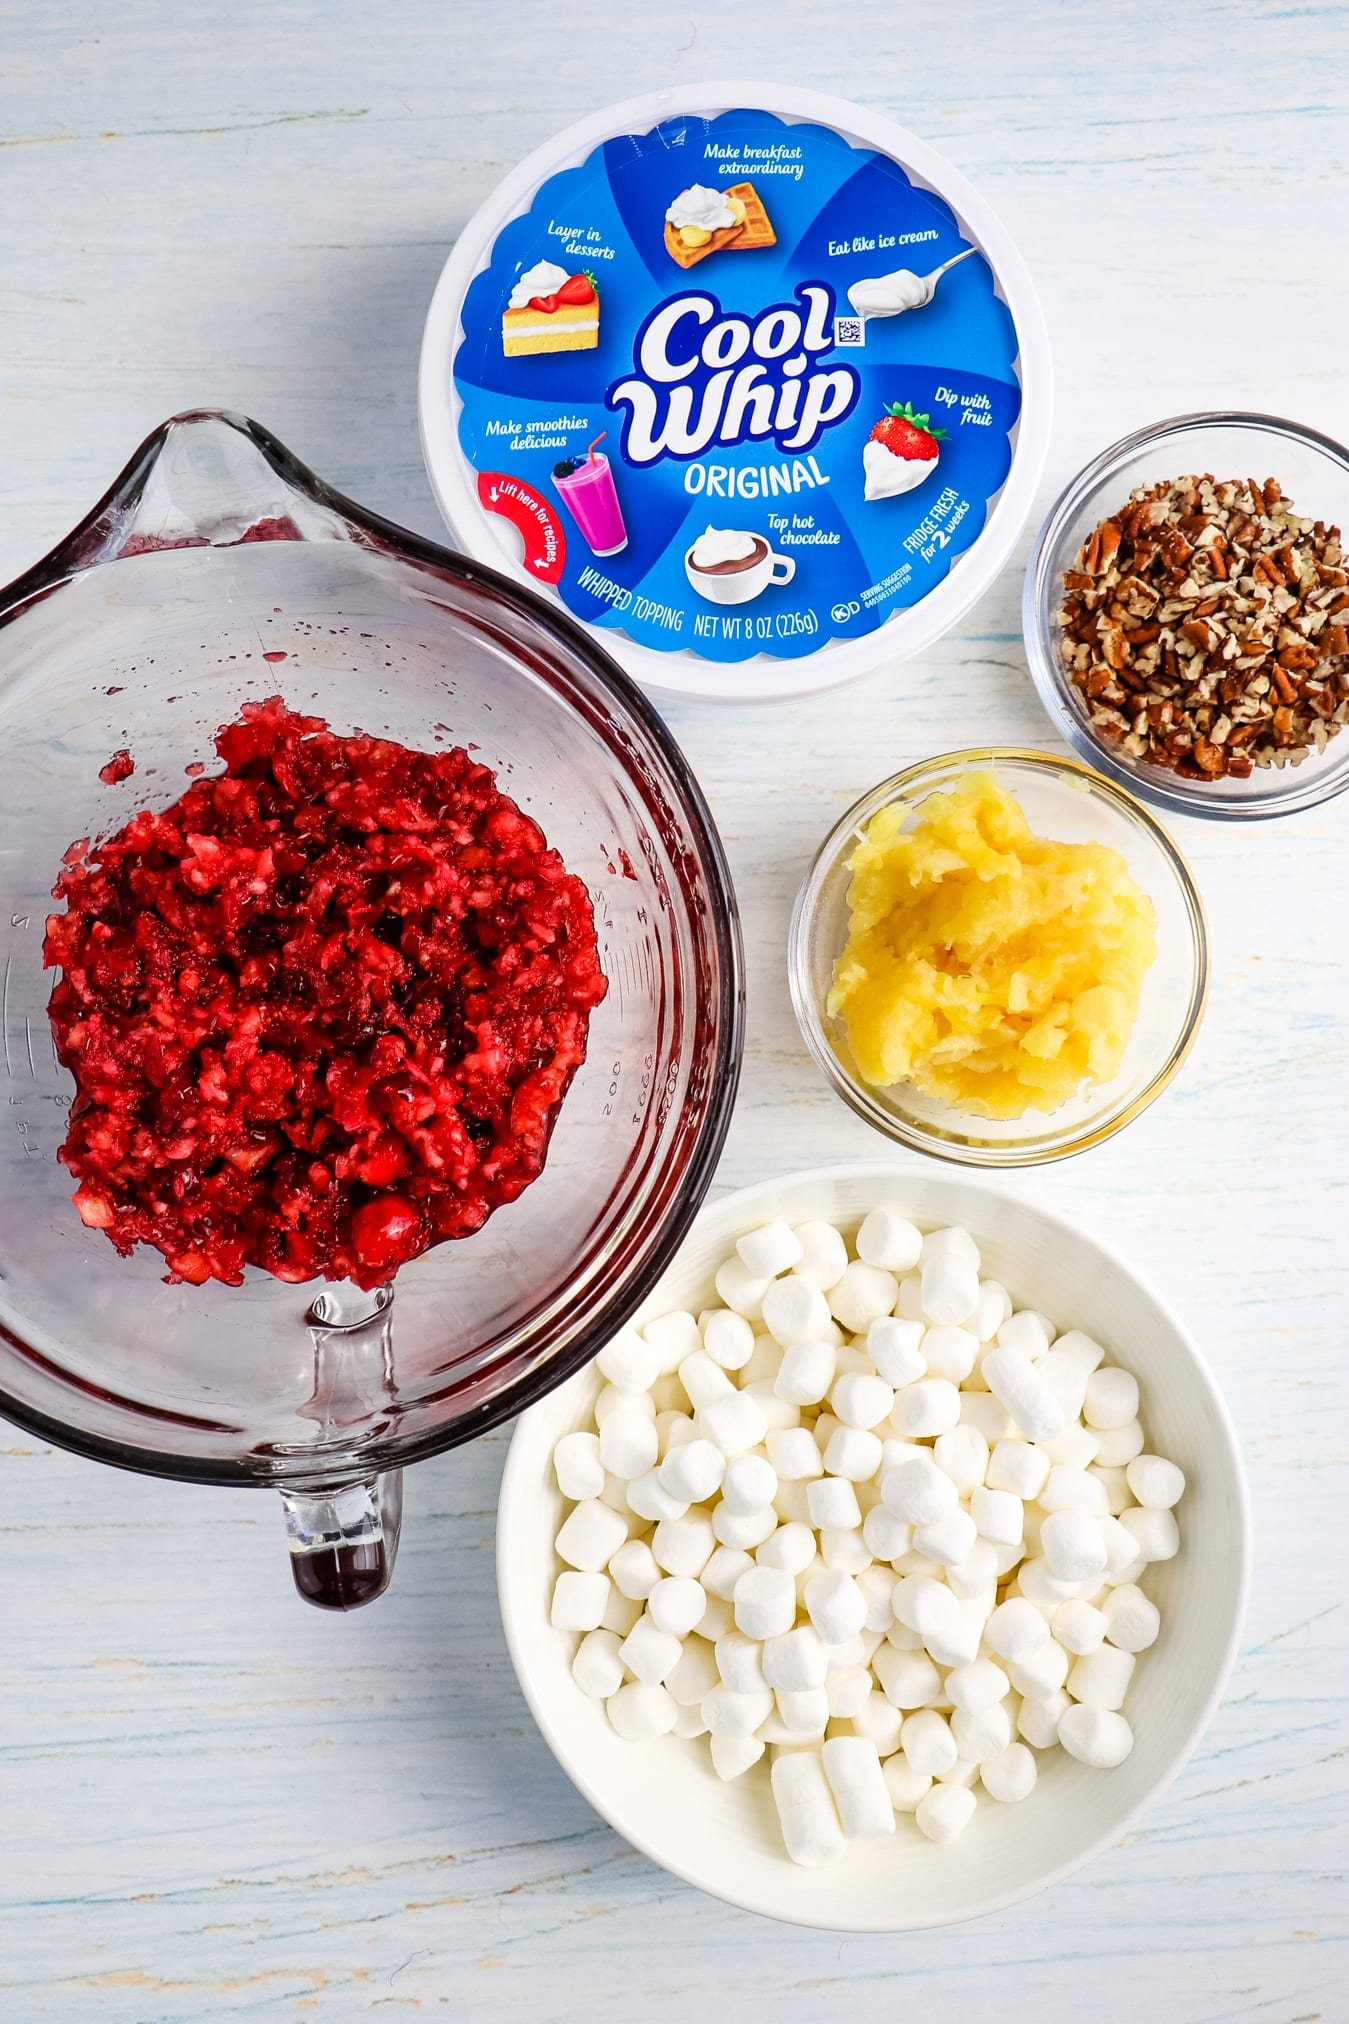 Chopped cranberries in bowl with other ingredients for cranberry fluff on the side.